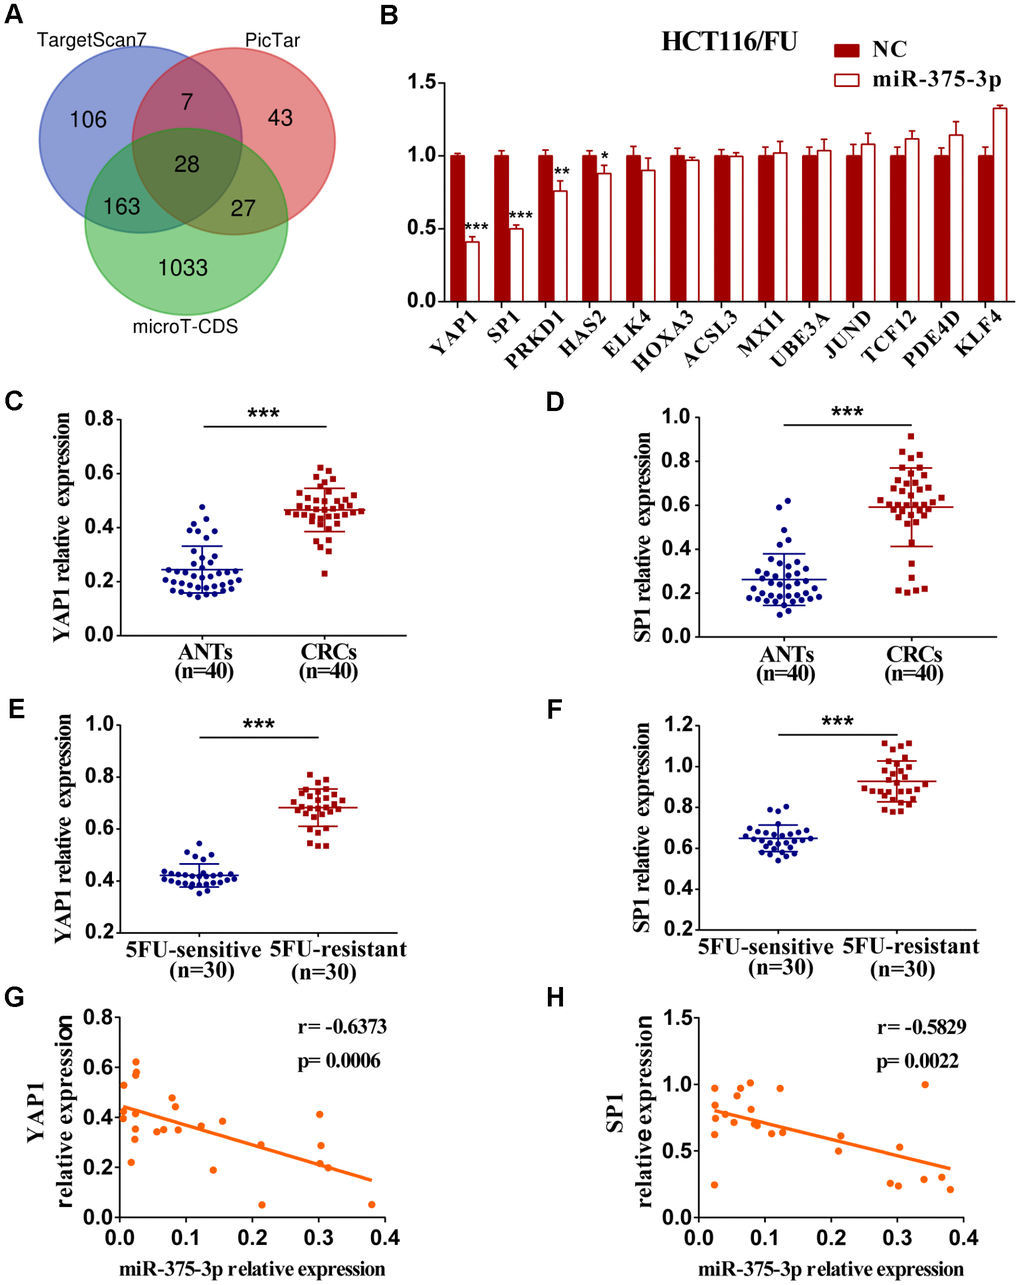 The expression of YAP1 and SP1 are inversely associated with miR-375-3p and chemosensitivity. (A) Potential target genes of miR-375-3p were predicted in three bioinformatics databases. (B) The mRNA expressions of 13 candidate targets were analyzed in HCT116/FU cells transfected with miR-375-3p/NC mimics. (C, D) The mRNA expression levels of YAP1 and SP1 were analyzed in CRC patients (n=40). (E, F) qRT-PCR analysis of the expressions of YAP1 and SP1 in 5FU-resistant and 5FU-sensitive groups (n=30, respectively). (G, H) The correlations of miR-375-3p expression and YAP1/SP1 expressions were analyzed in CRC tissues, respectively (n = 25). *P P P 